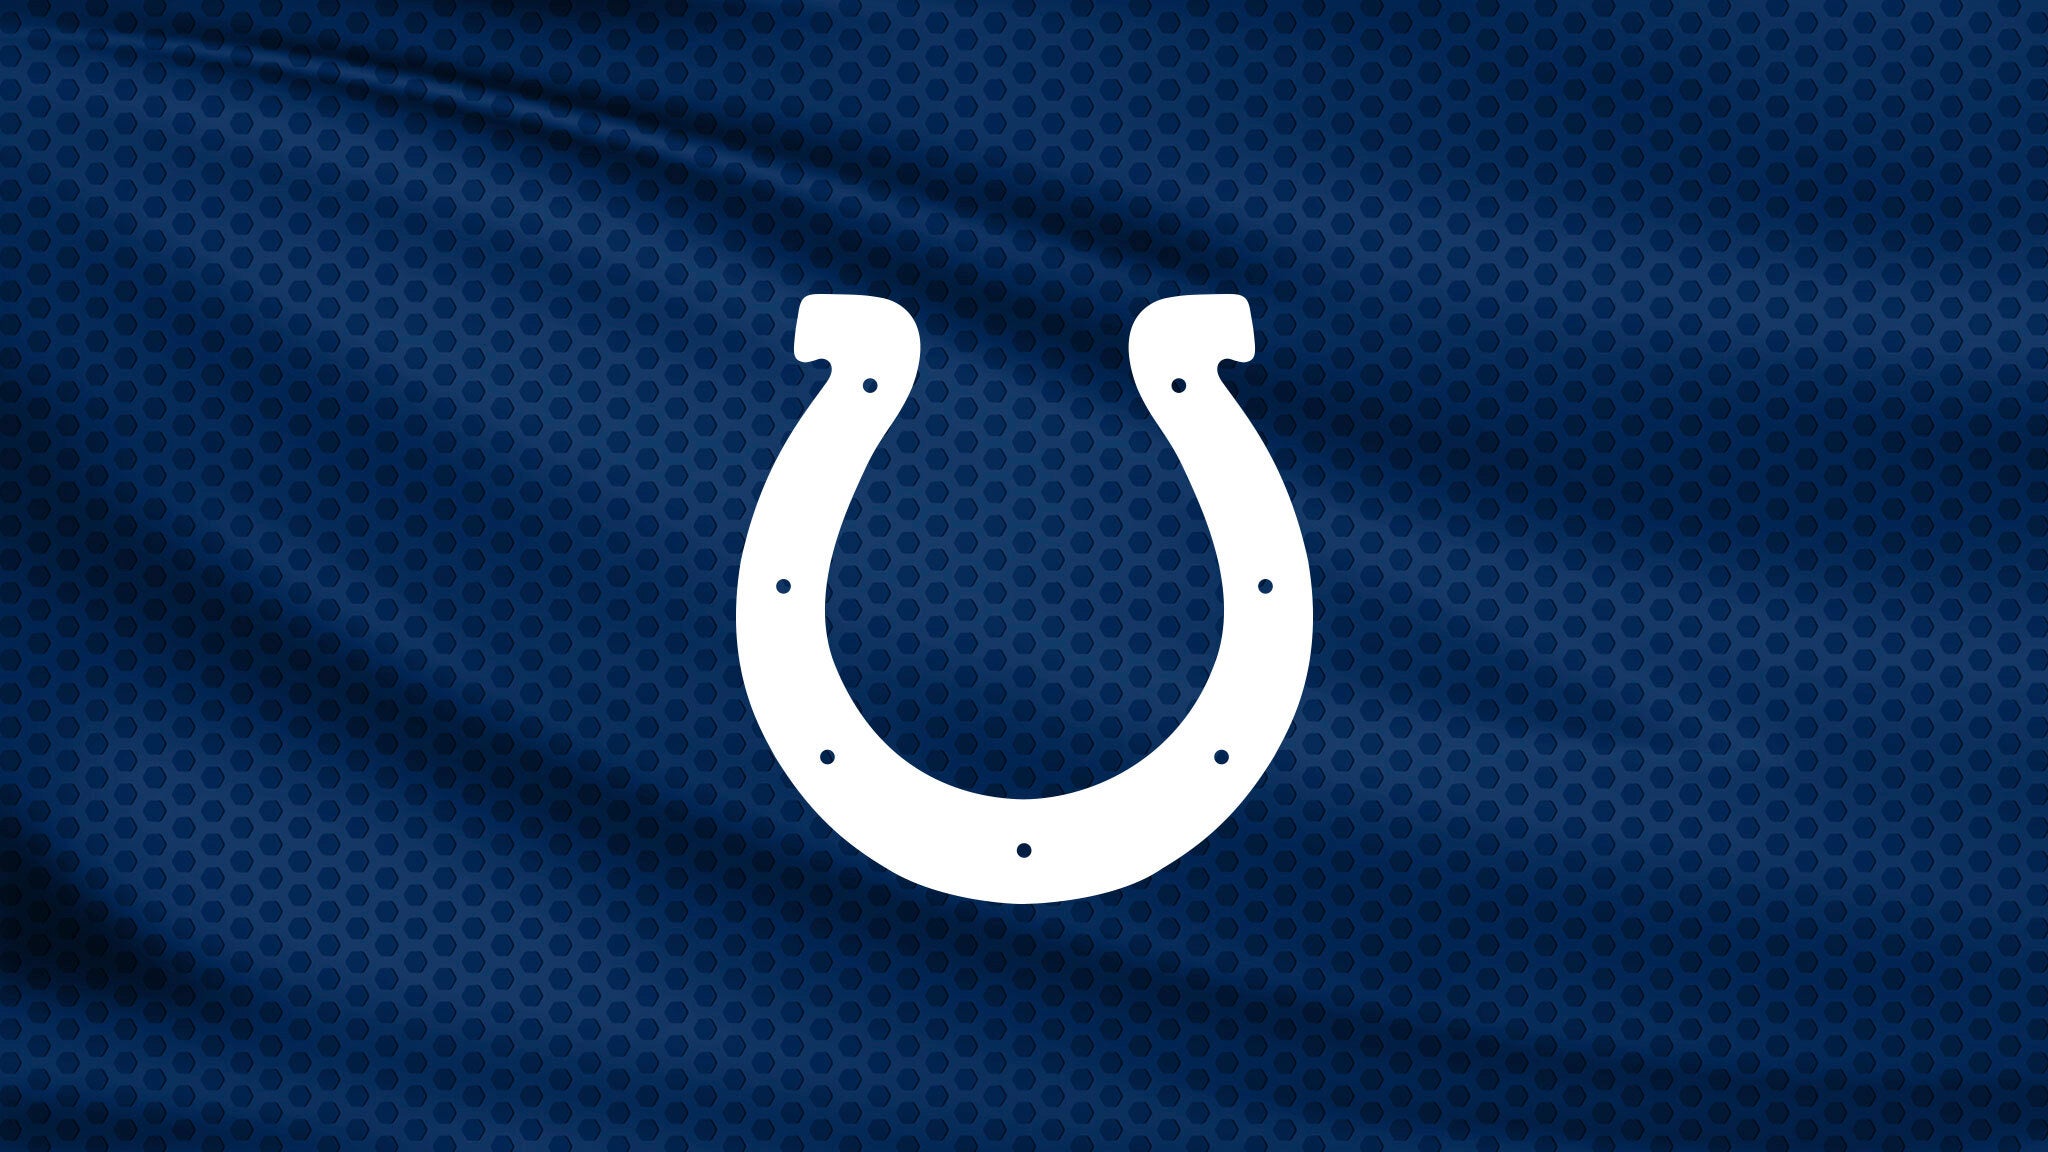 Indianapolis Colts vs. Tennessee Titans in Indianapolis promo photo for Colts VIP presale offer code